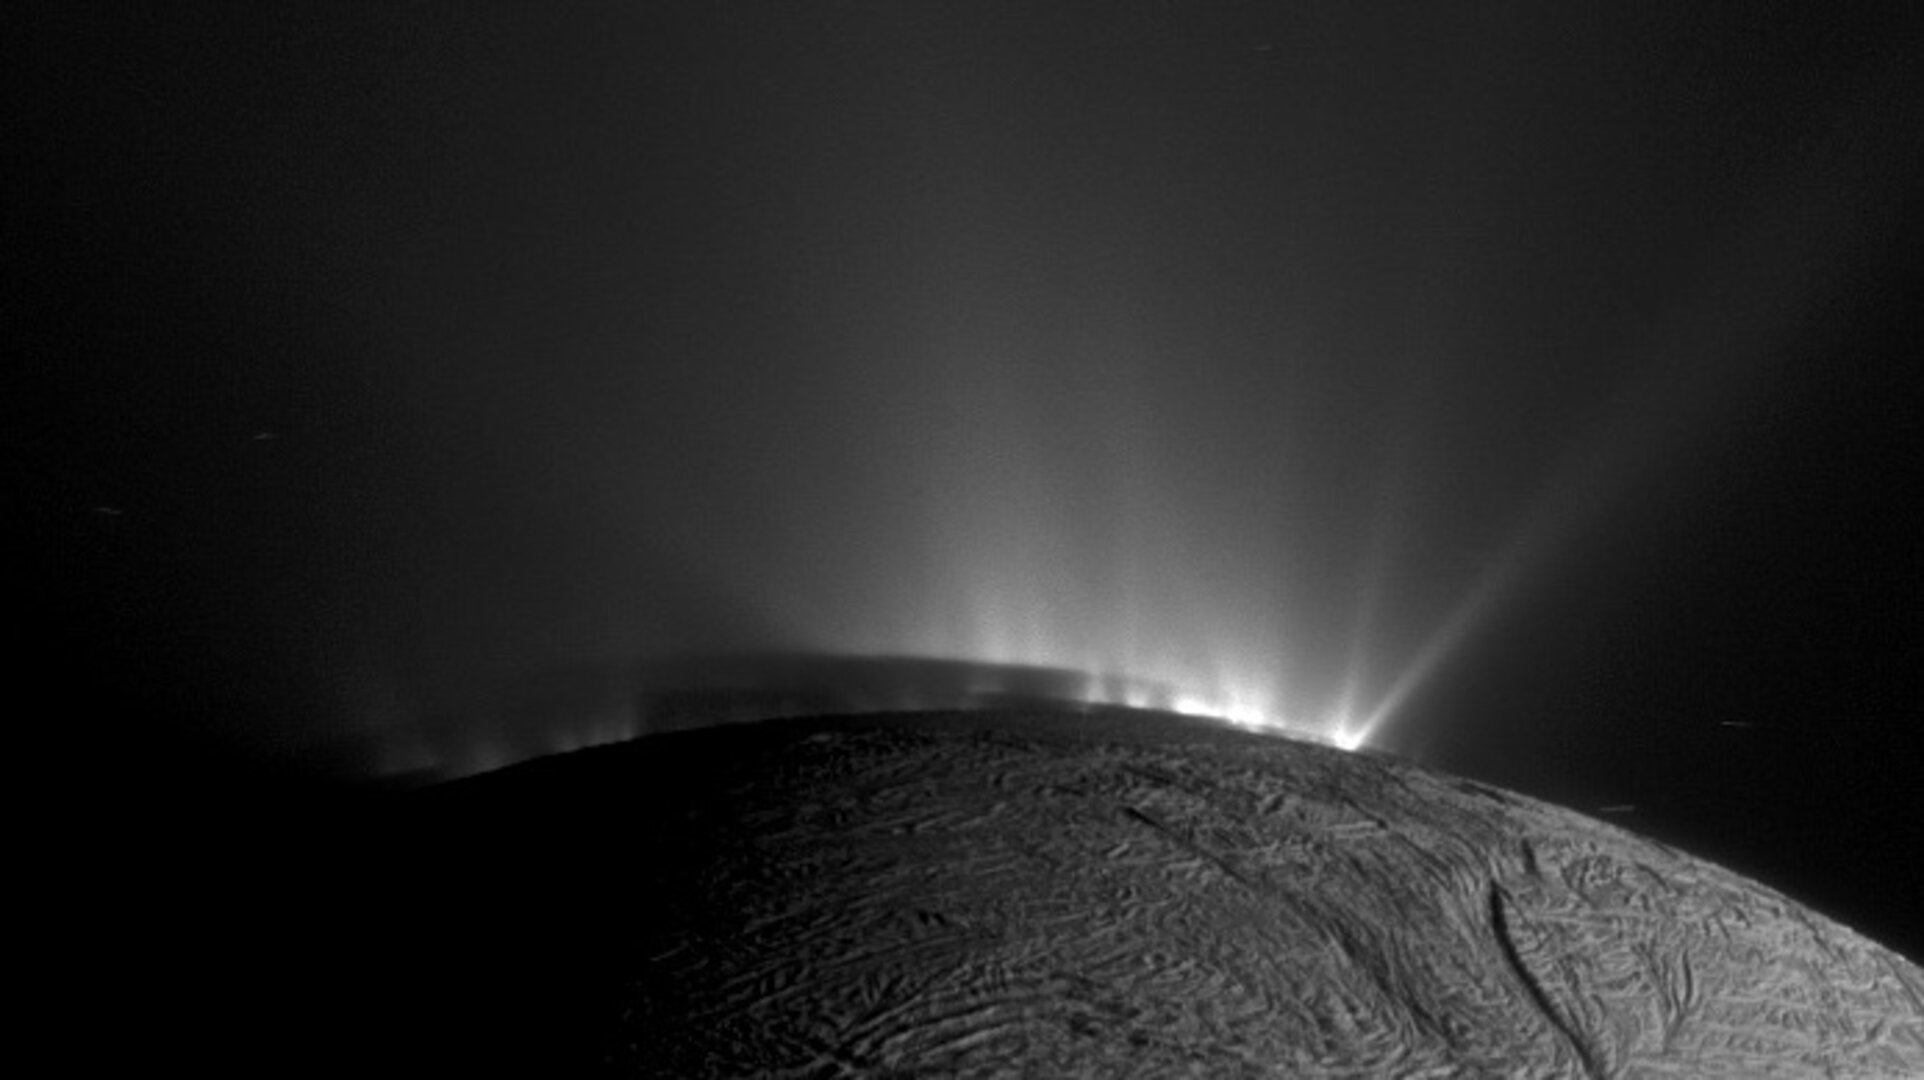 Enceladus jets and shadows